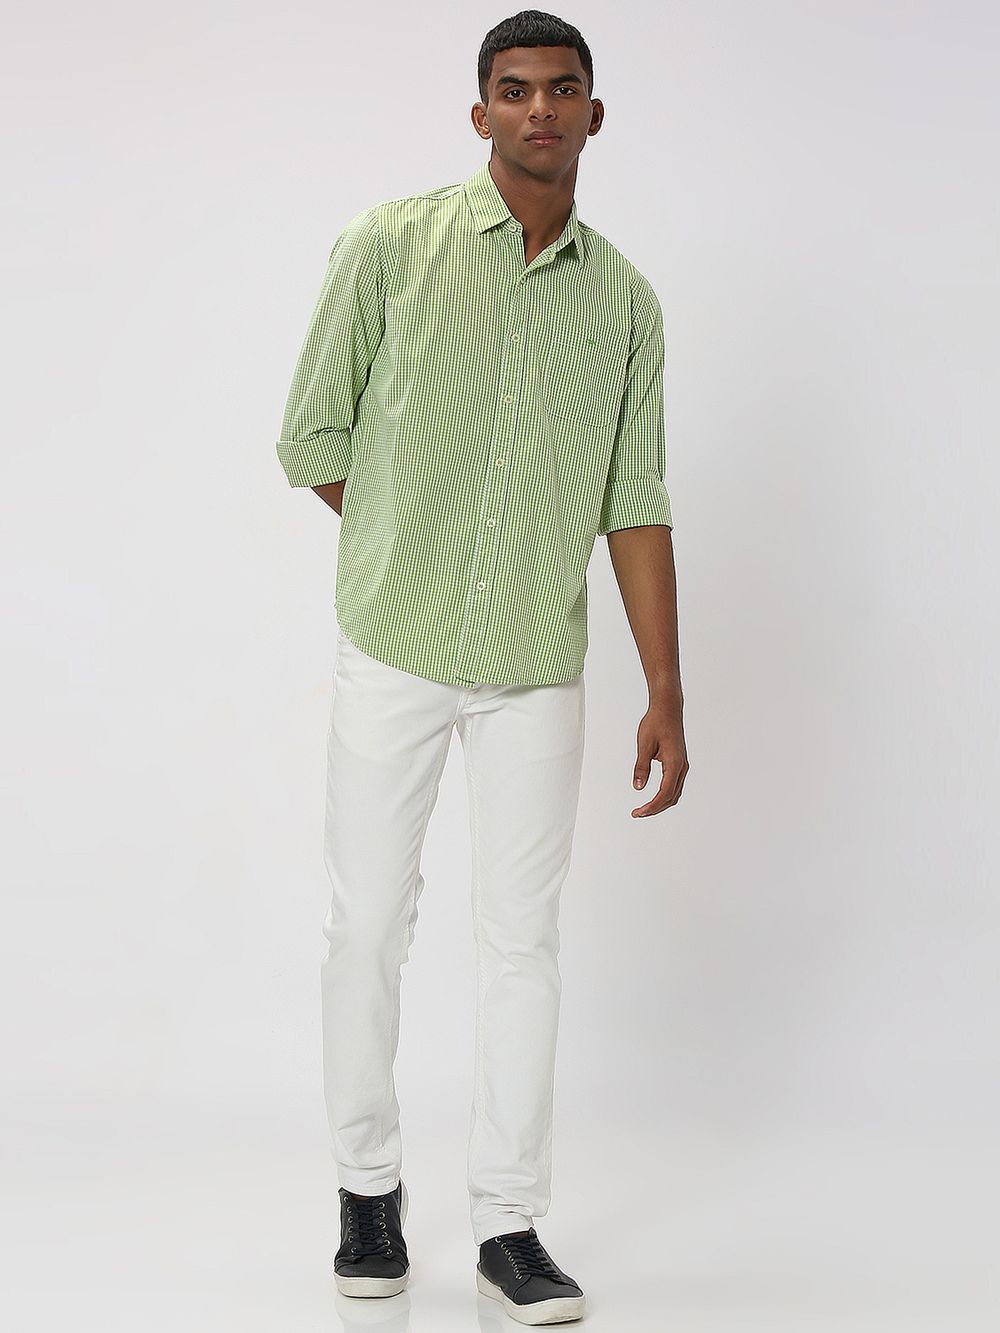 Green & White Gingham Check Slim Fit Casual Shirt